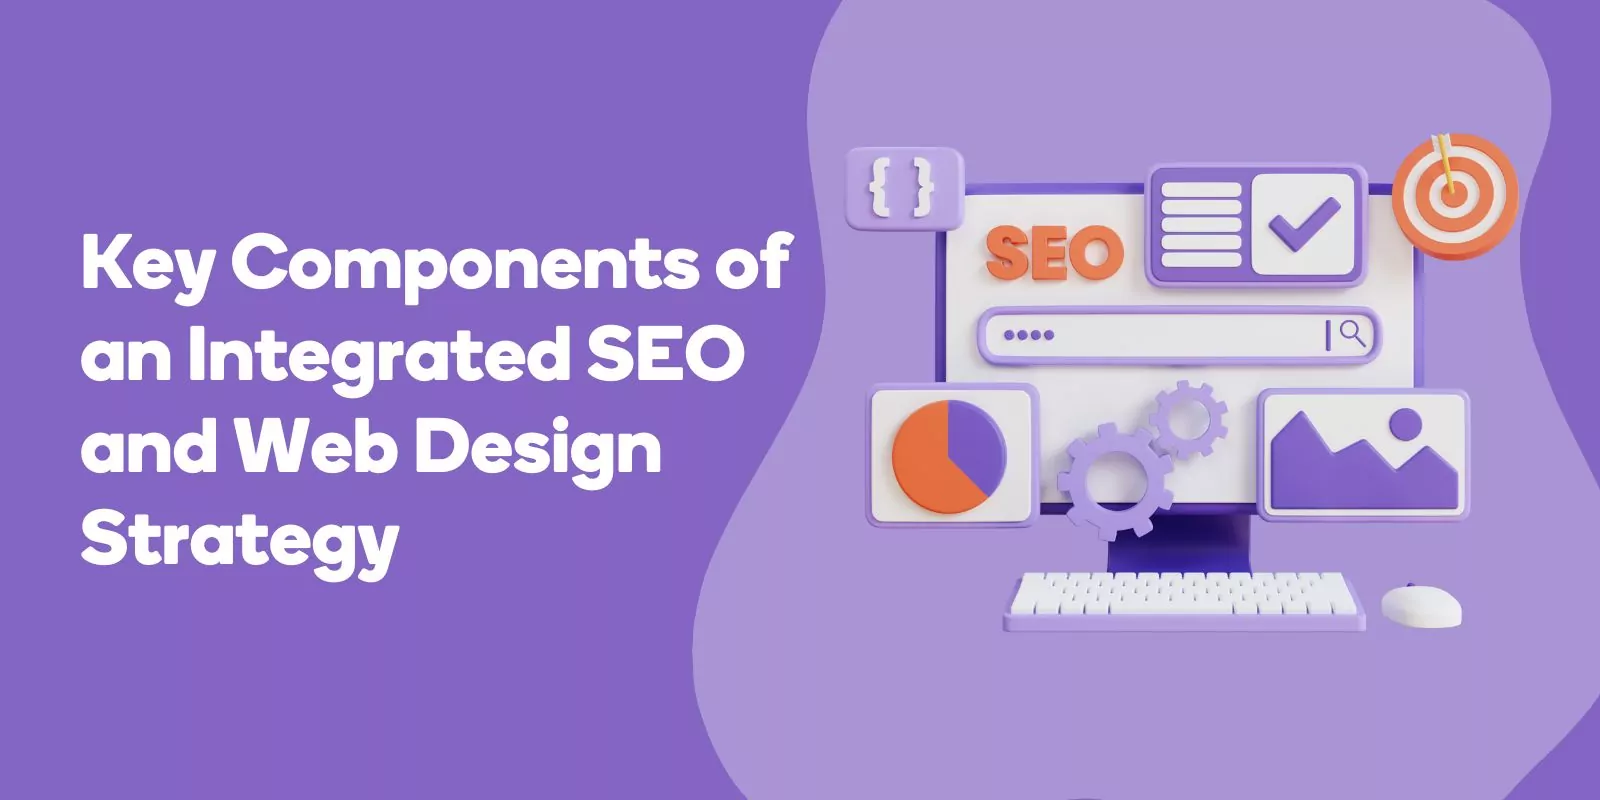 Key Components of an Integrated SEO and Web Design Strategy